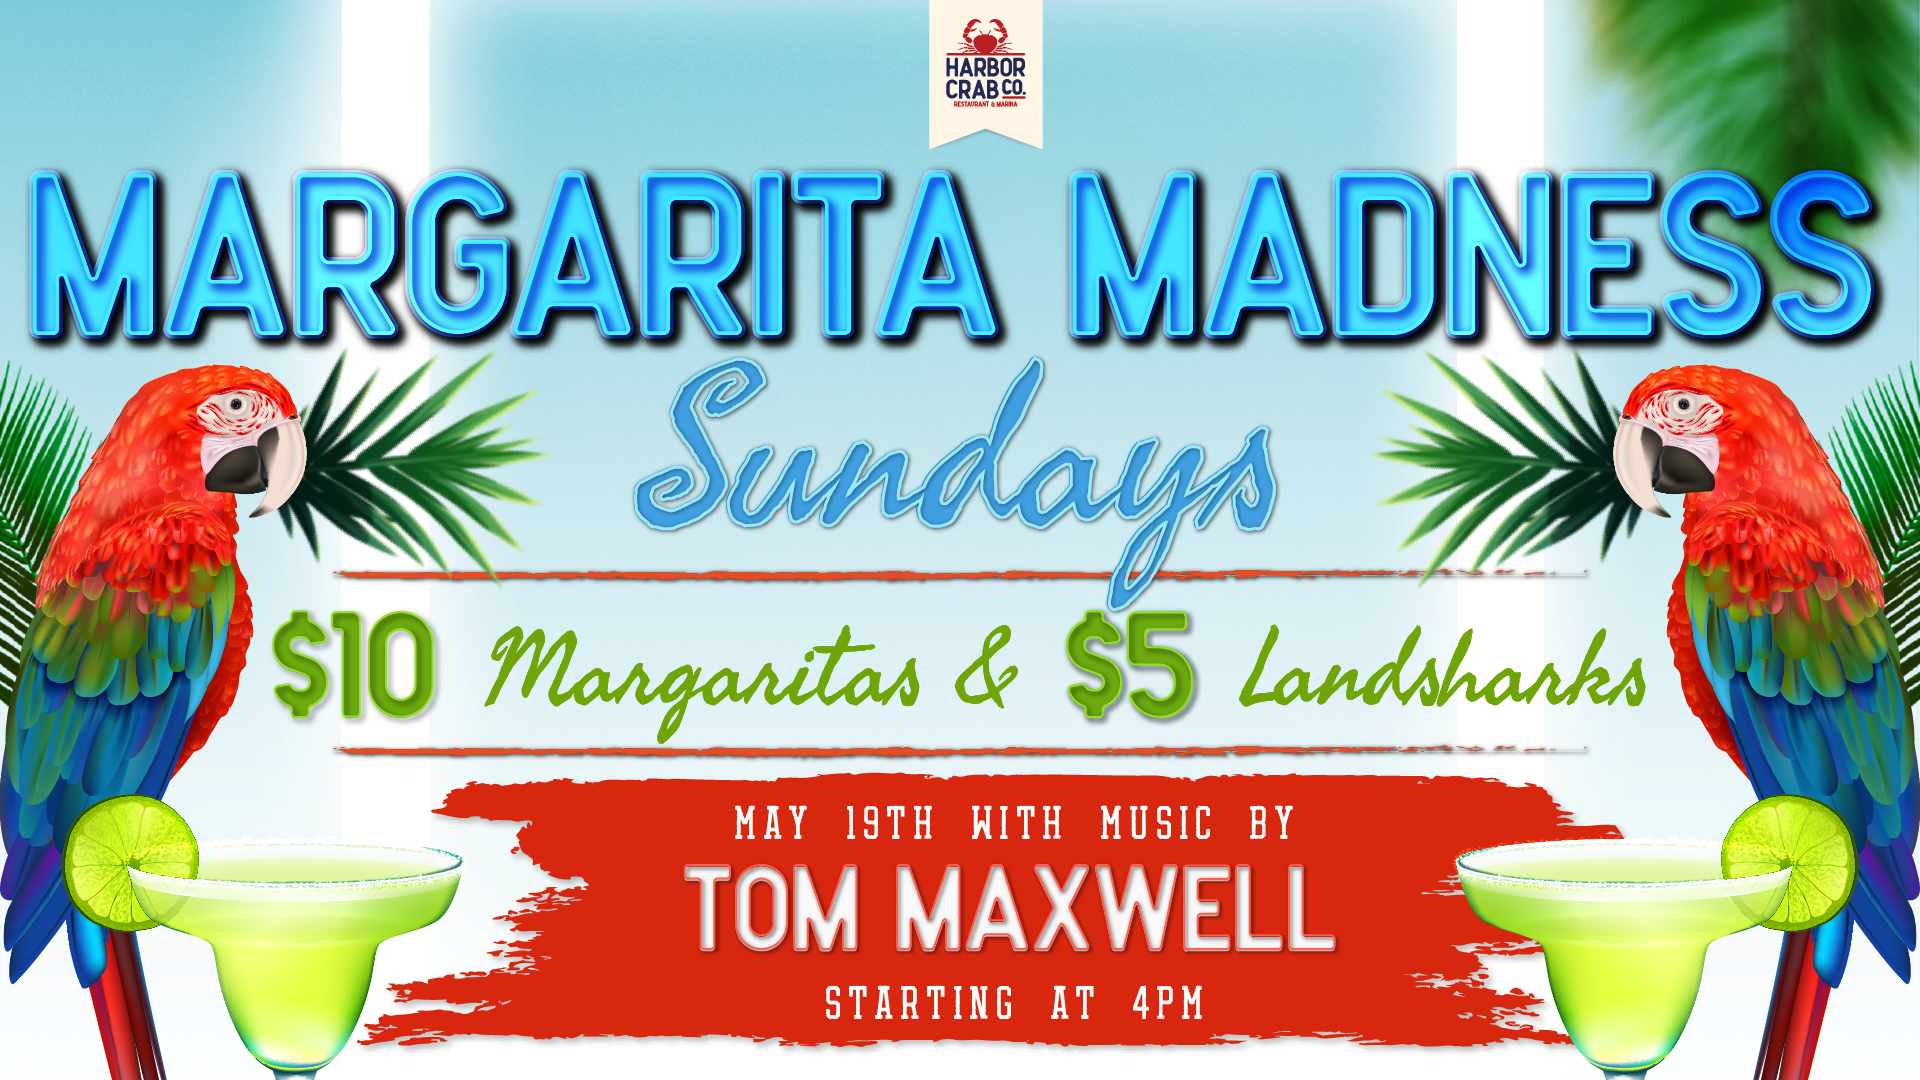 Margarita Madness Sundays at Harbor Crab on May 19th, featuring live music by Tom Maxwell starting at 4 PM.